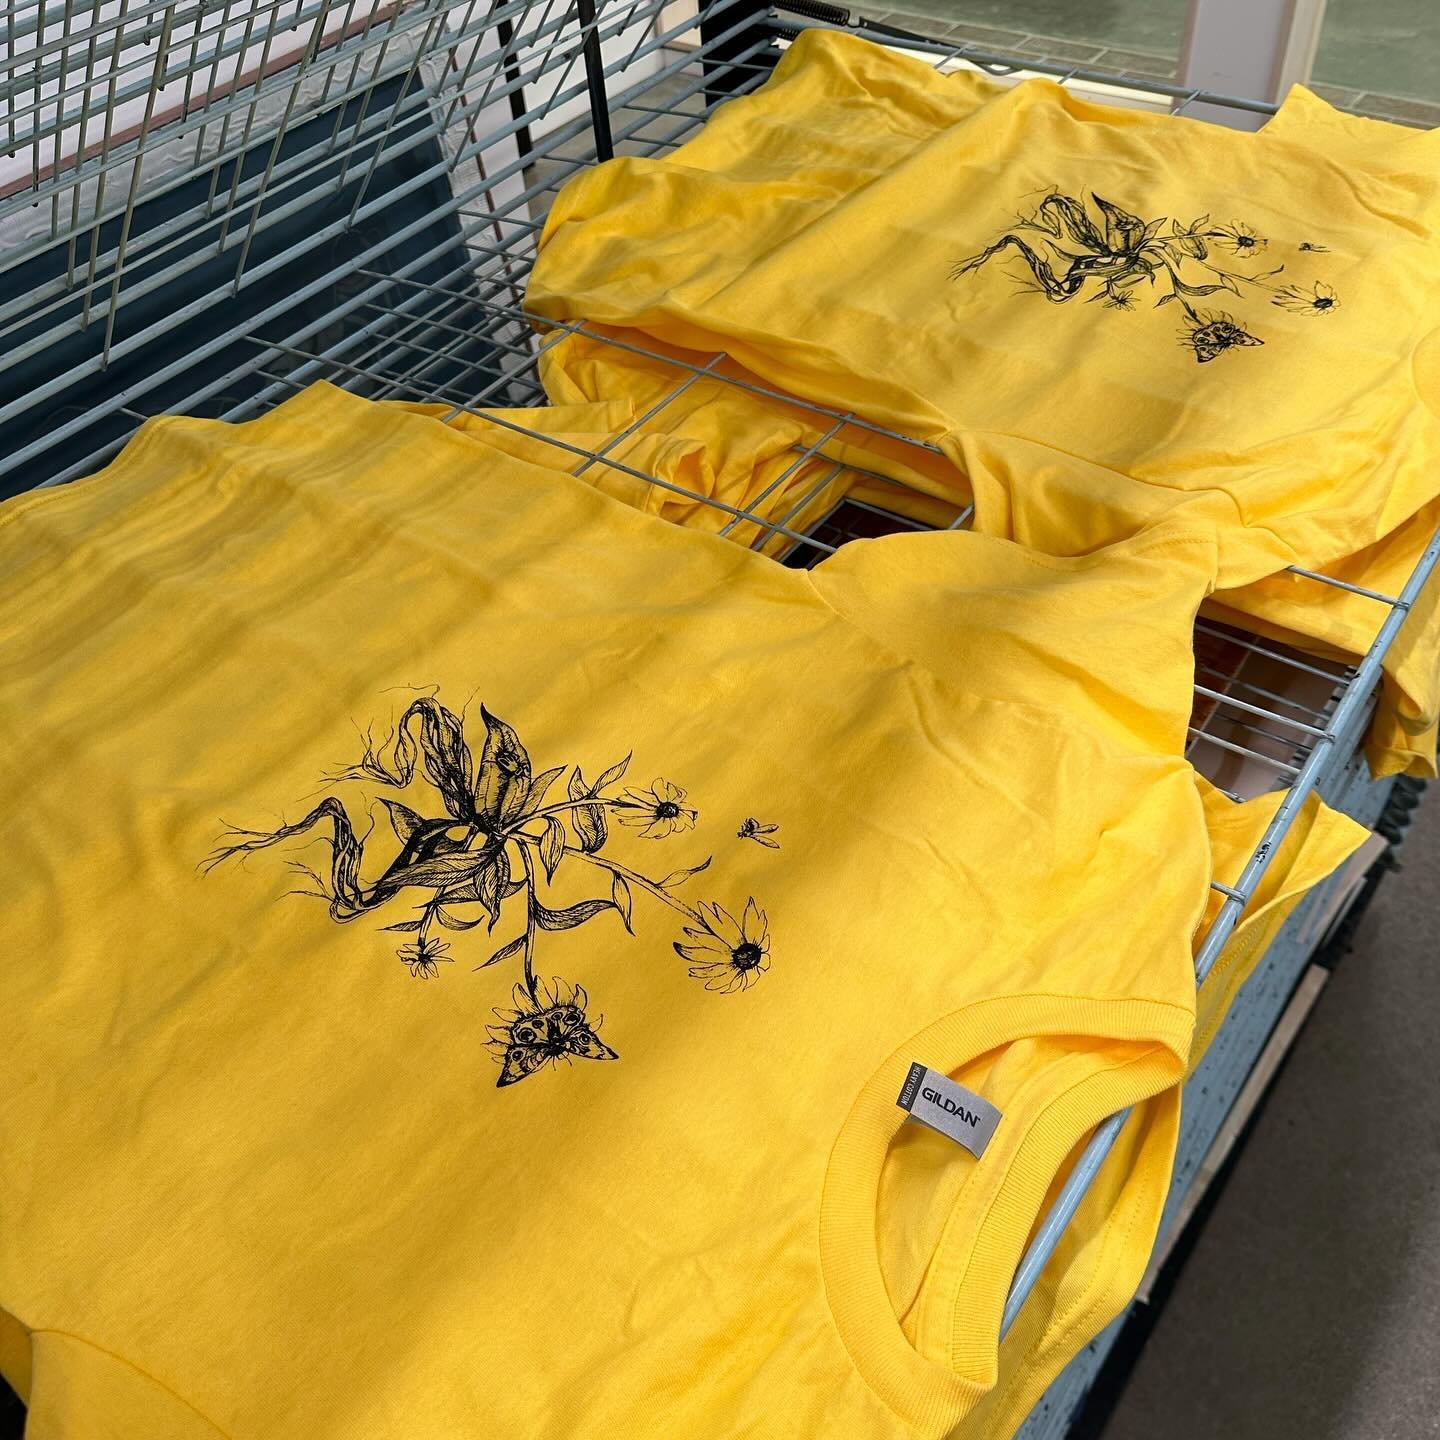 Come see me at the next Benson First Friday art market on may 3rd! I&rsquo;ll have fresh screen printed shirts in 2 designs 🌻 also new prints that aren&rsquo;t up available on my Etsy yet! 🌻 ALSO stickers!!! 
Printed at @theunionomaha